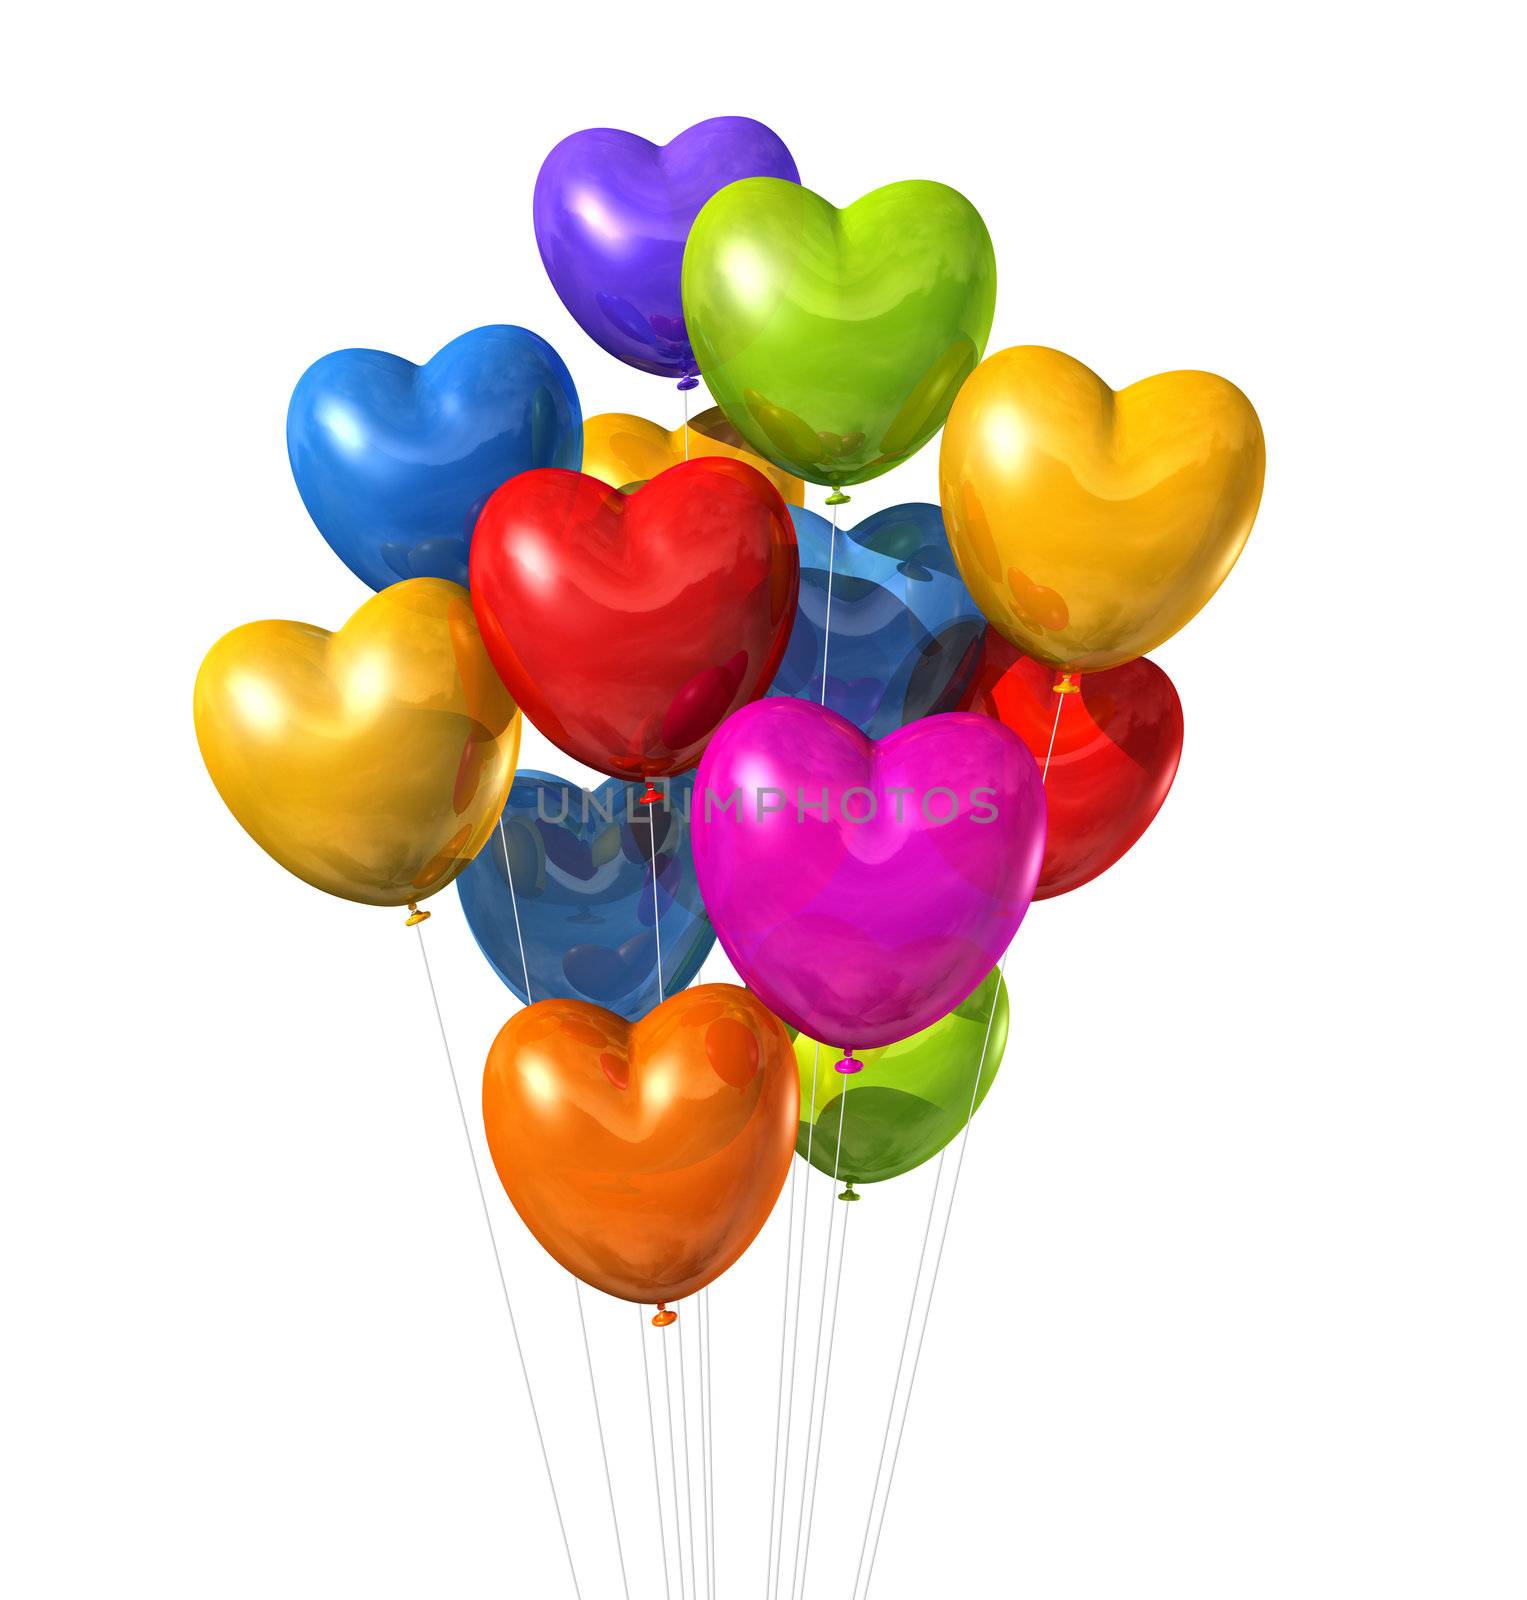 colored heart shape balloons isolated on white by daboost